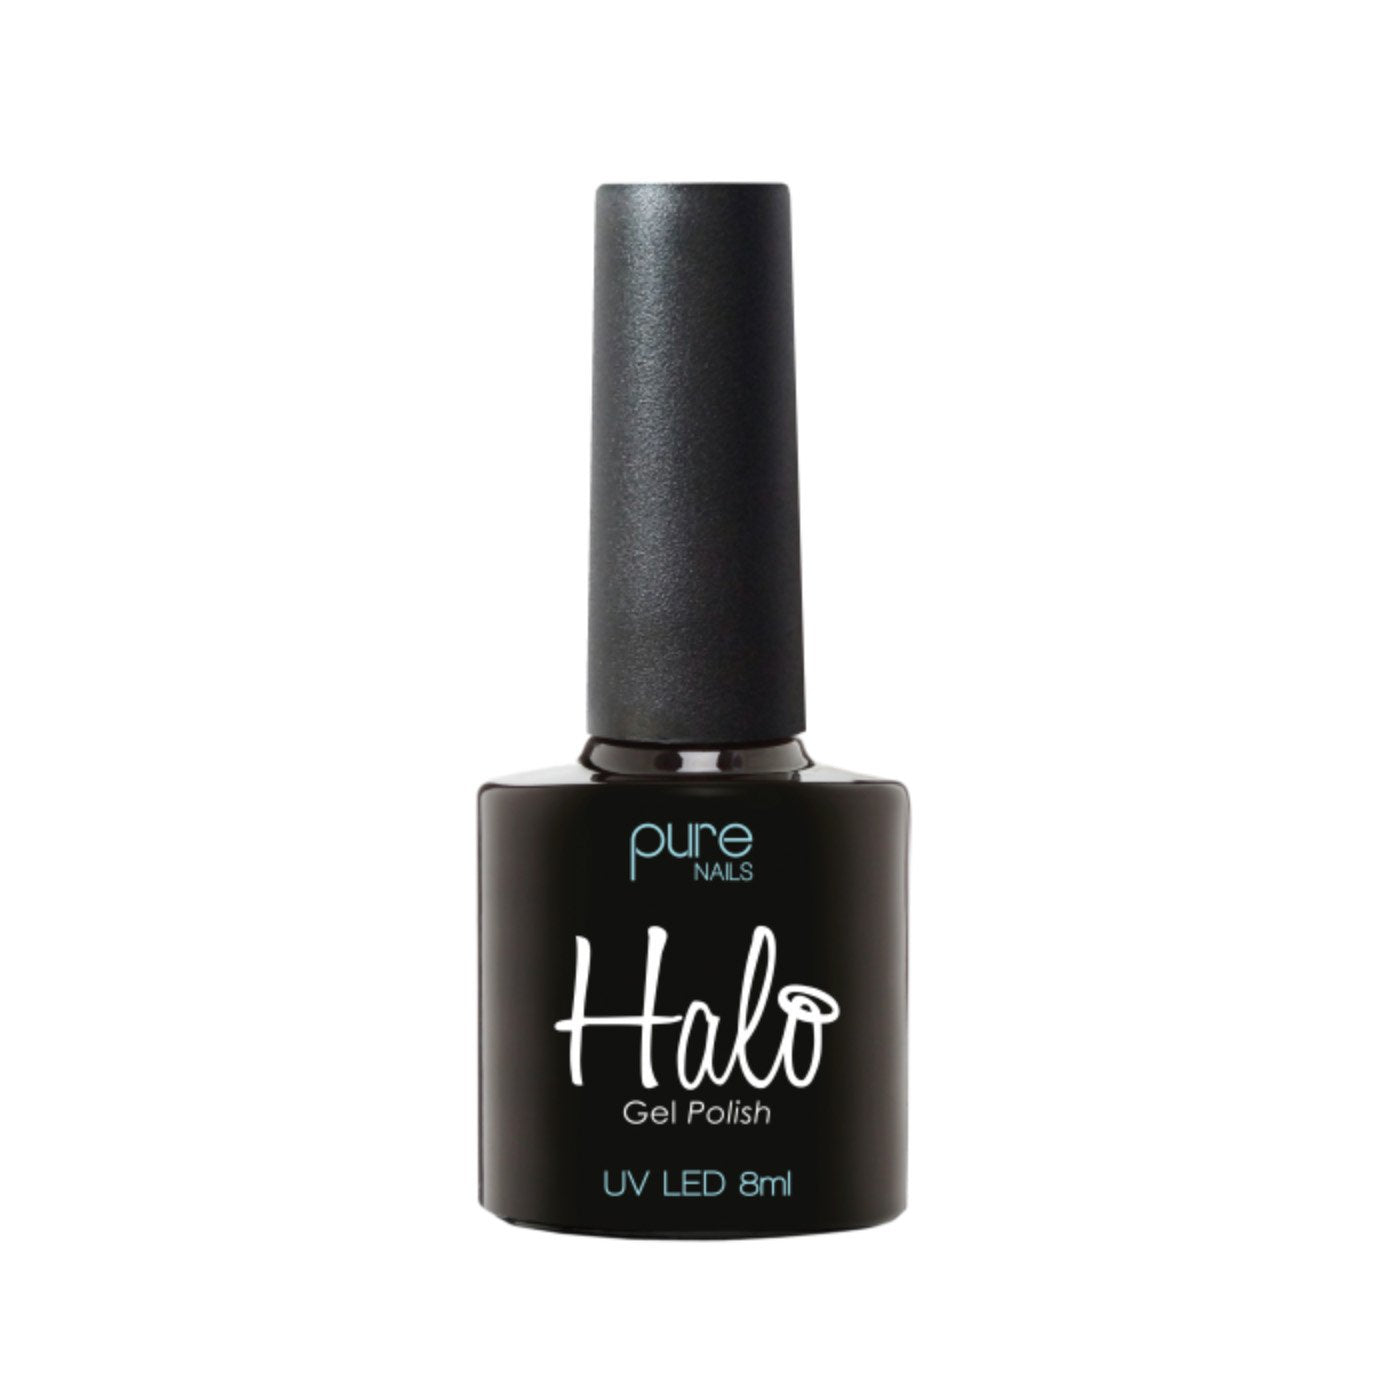 Halo Gel Polish - Non-wipe Top Coat (15ml - LARGE) - Ultimate Hair and Beauty